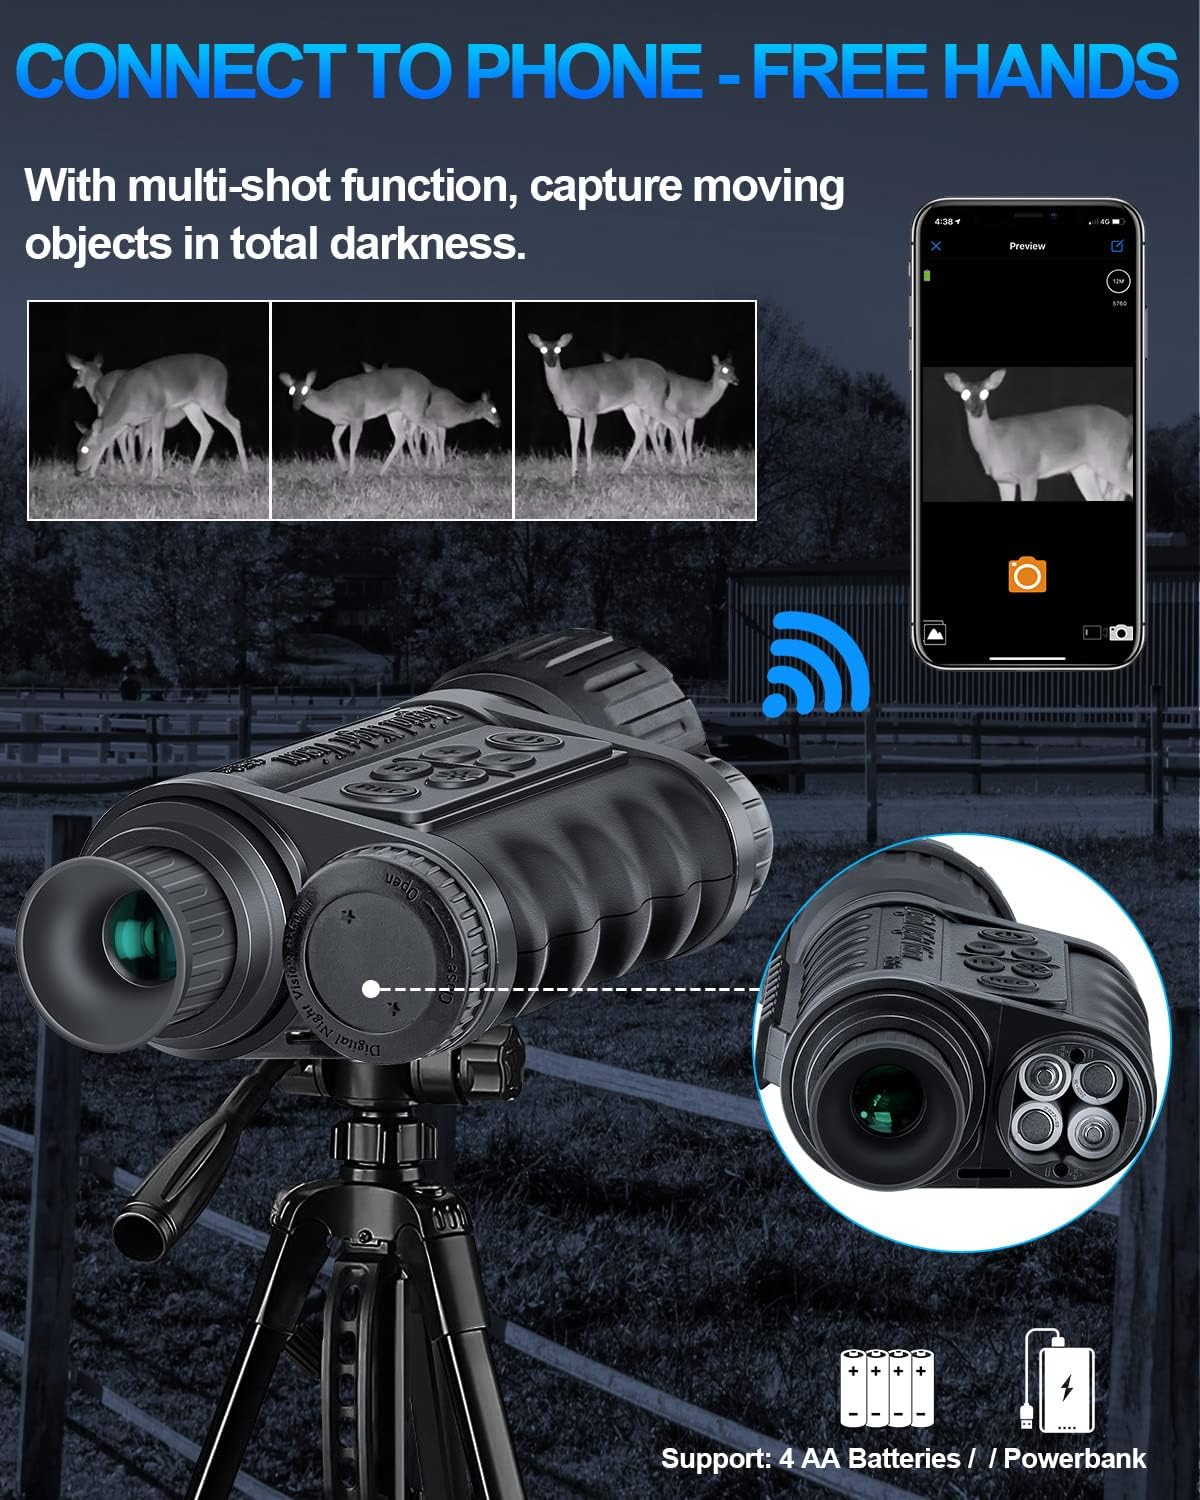 True WiFi Night Vision Monocular 32G Super HD in Full Darkness Clearly Infrared Camera Telescope 12MP Photo Video 5X Digital Zoom, Smartphone iOS/Android Night Watching Gear for Hunting Travel Gifts